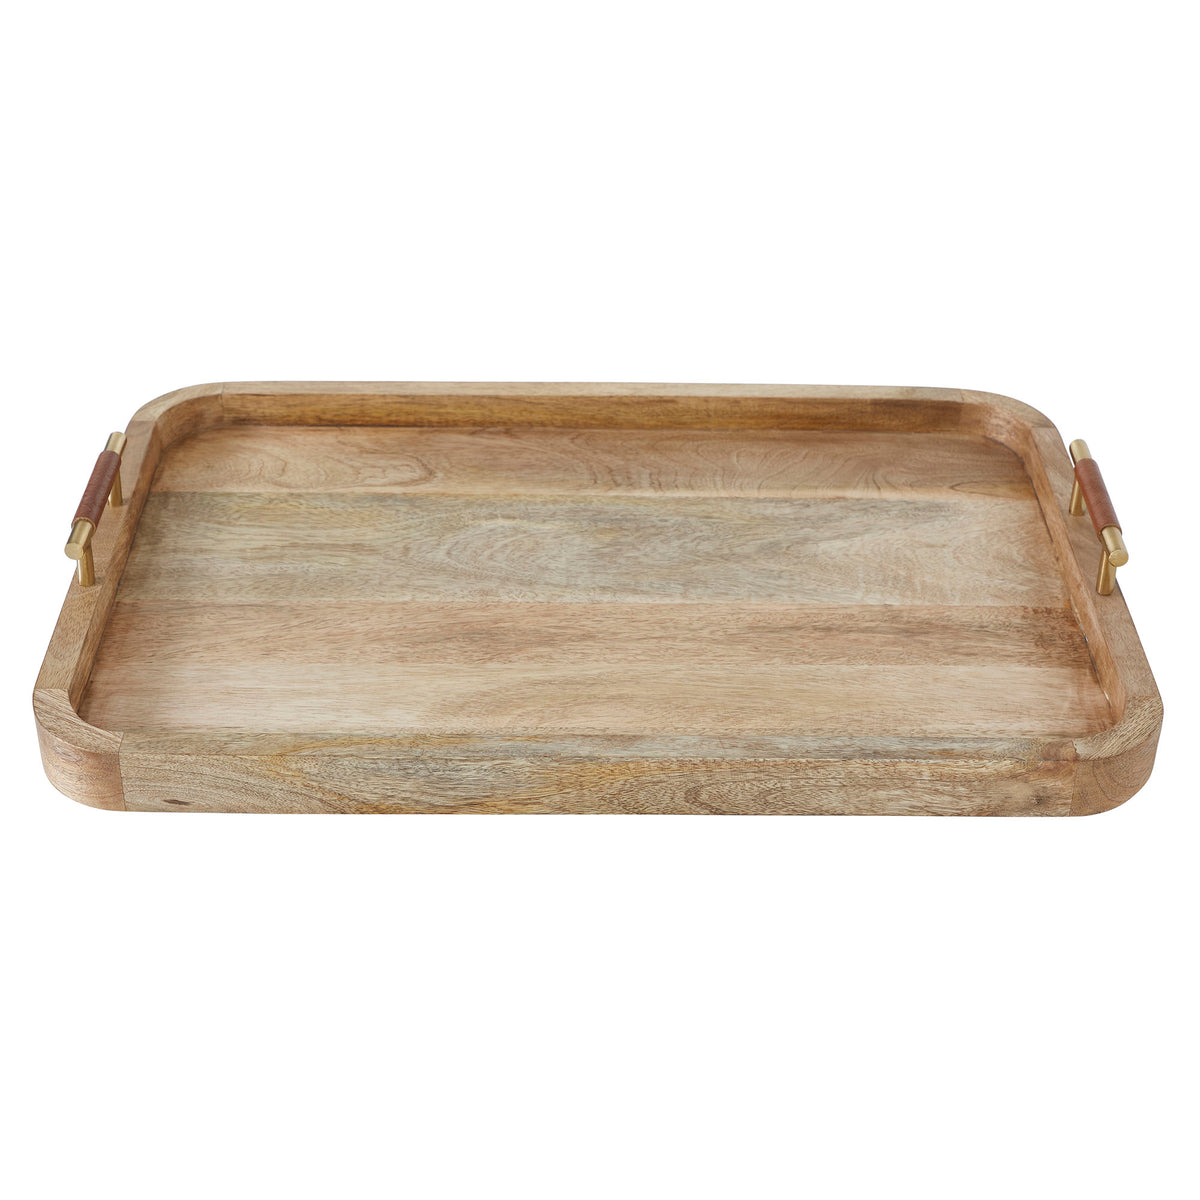 Mango Wood Tray w/Leather Wrapped Handles